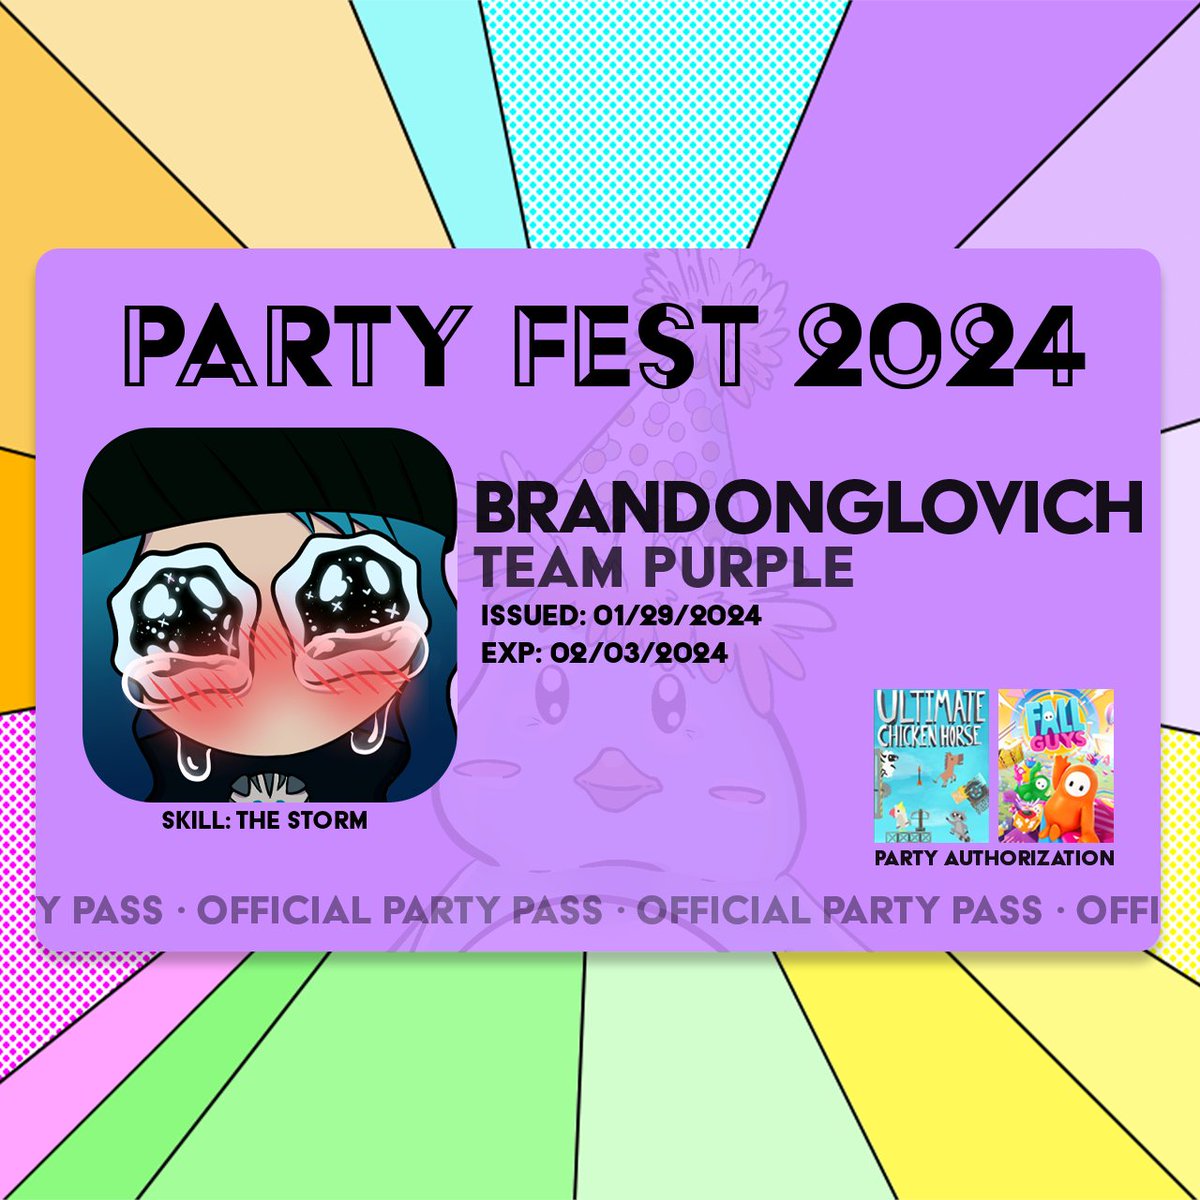 PARTYFEST FINALE IS HAPPENING NOW!!!!!

All 20 streamers are going head to head in Fall Guys! 

If you can come hang, PLEASE spam the ever-living hell out of the purple cheer emote in the chat! Team purple needs you 😂🥳

twitch.tv/radiantgardene…